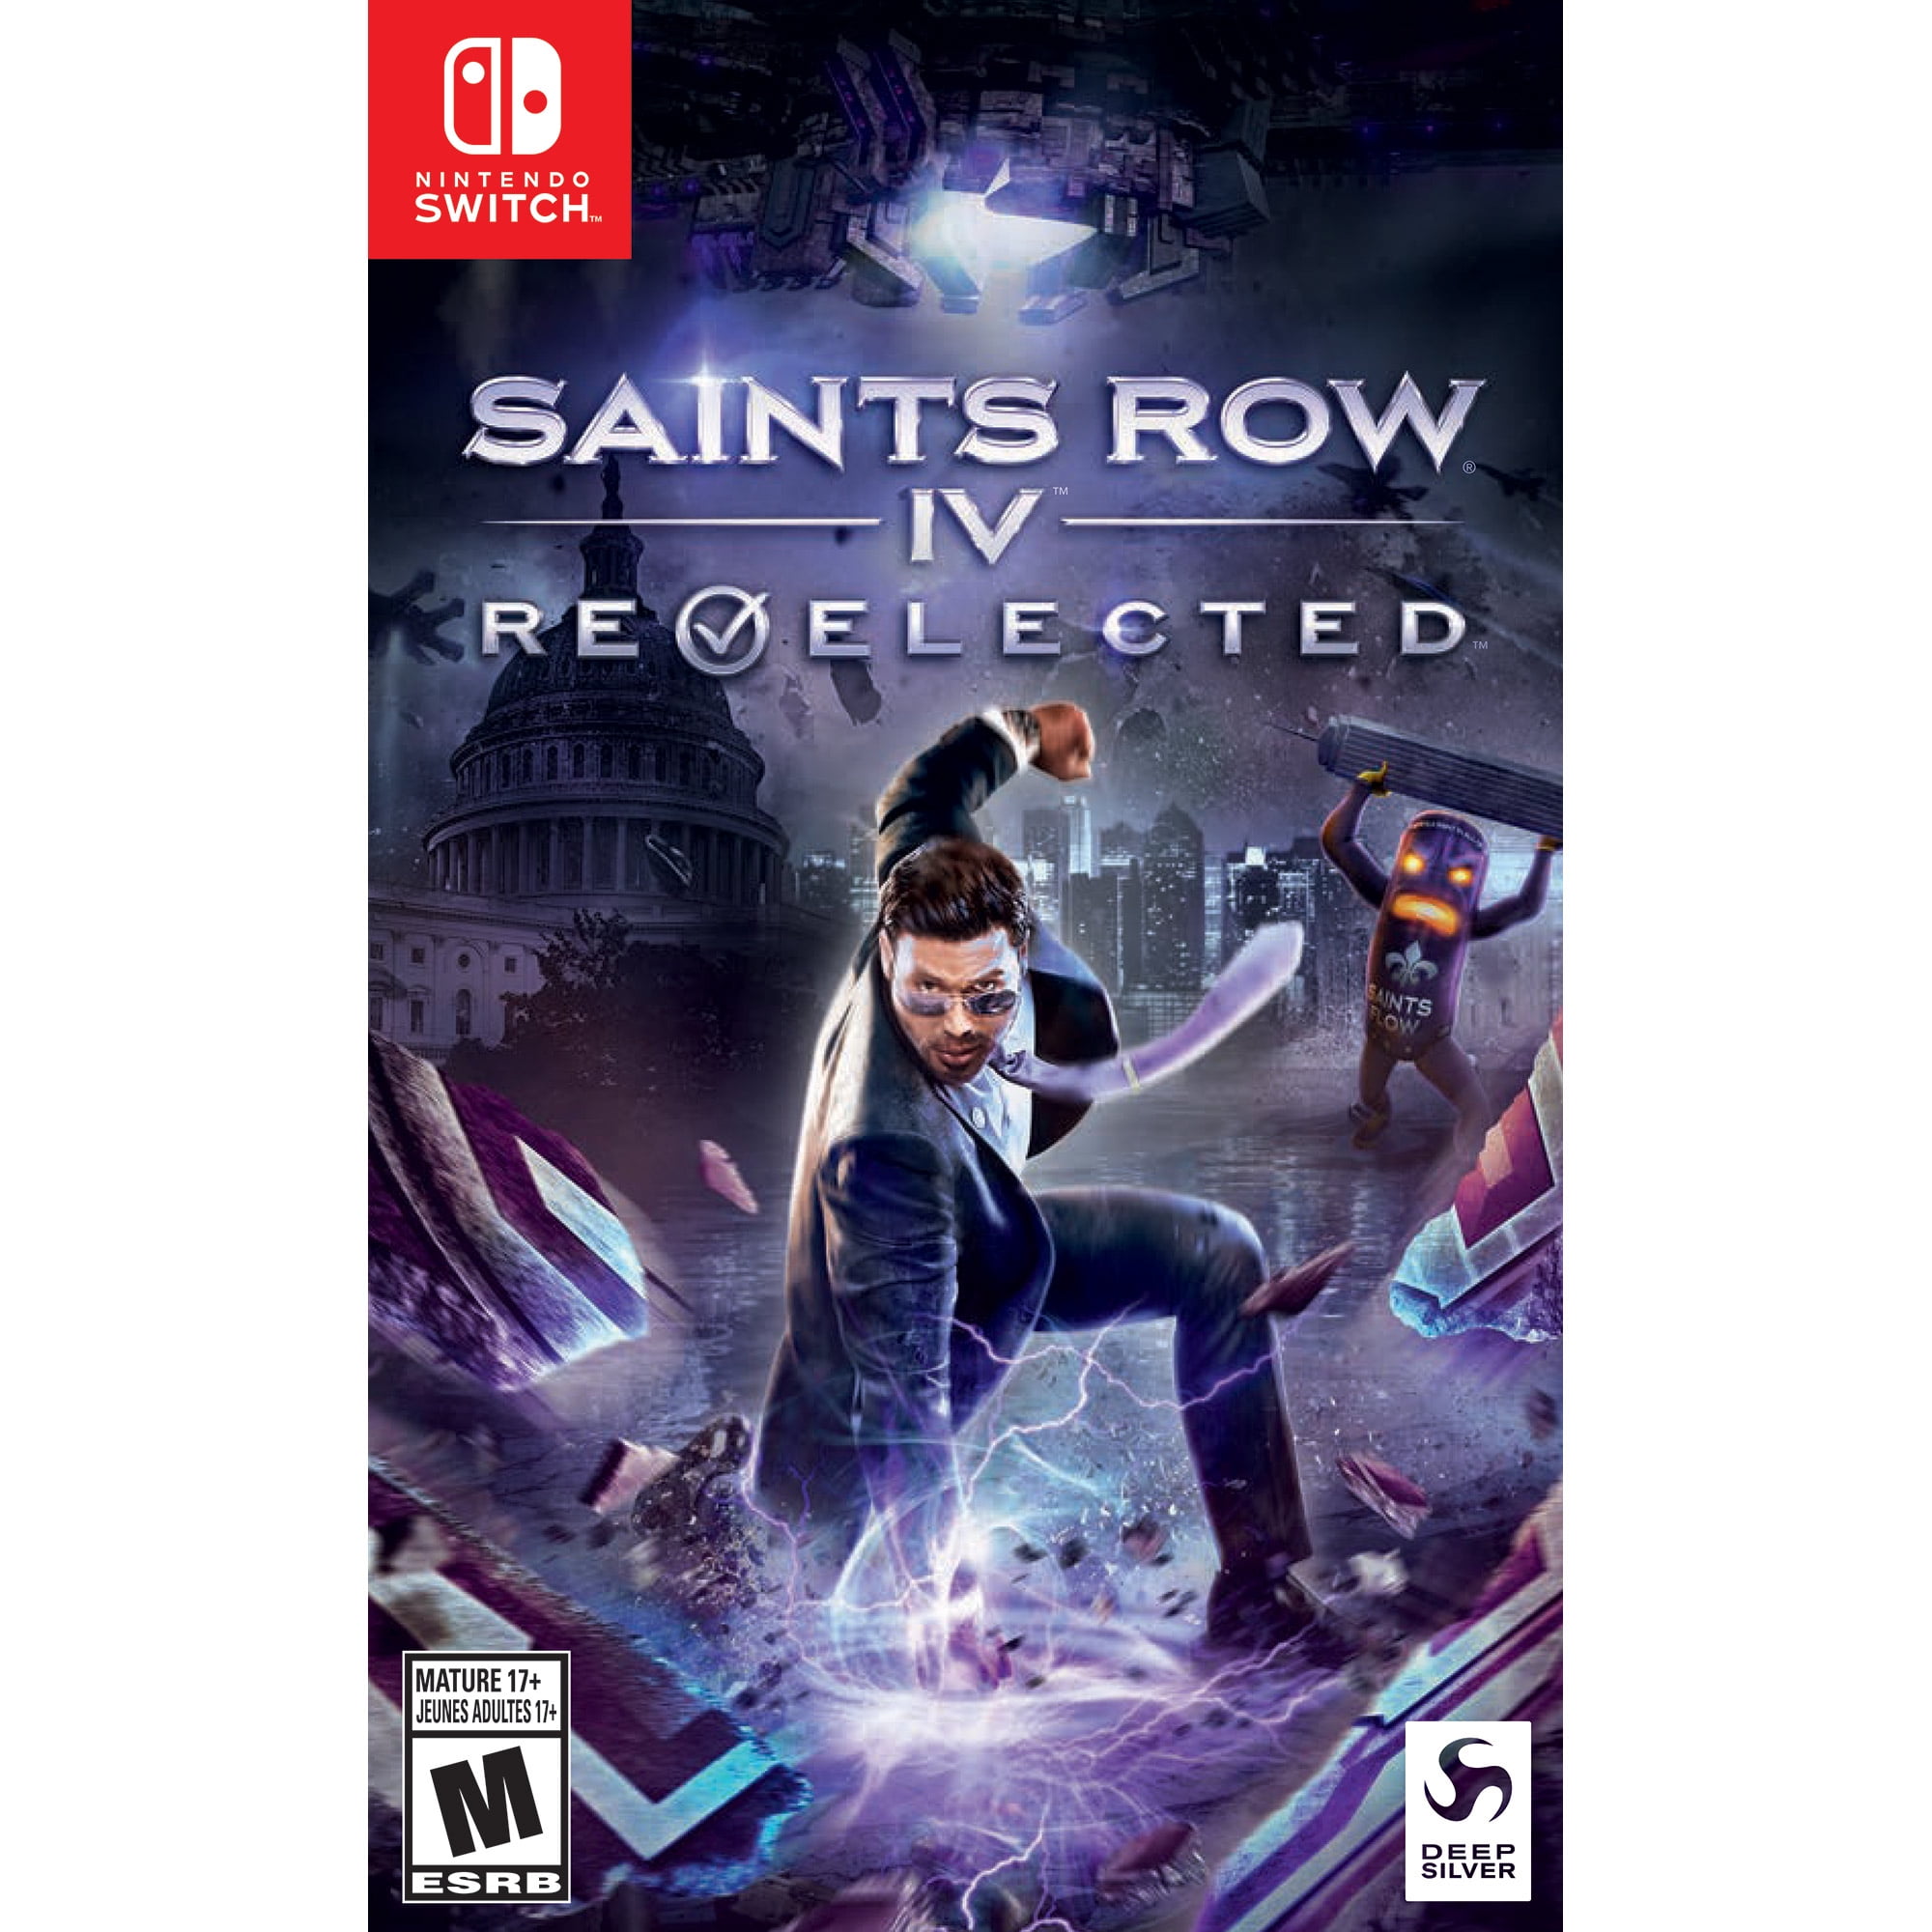 SAINTS ROW IV: Re-Elected, THQ-Nordic, Nintendo Switch, 816819016107